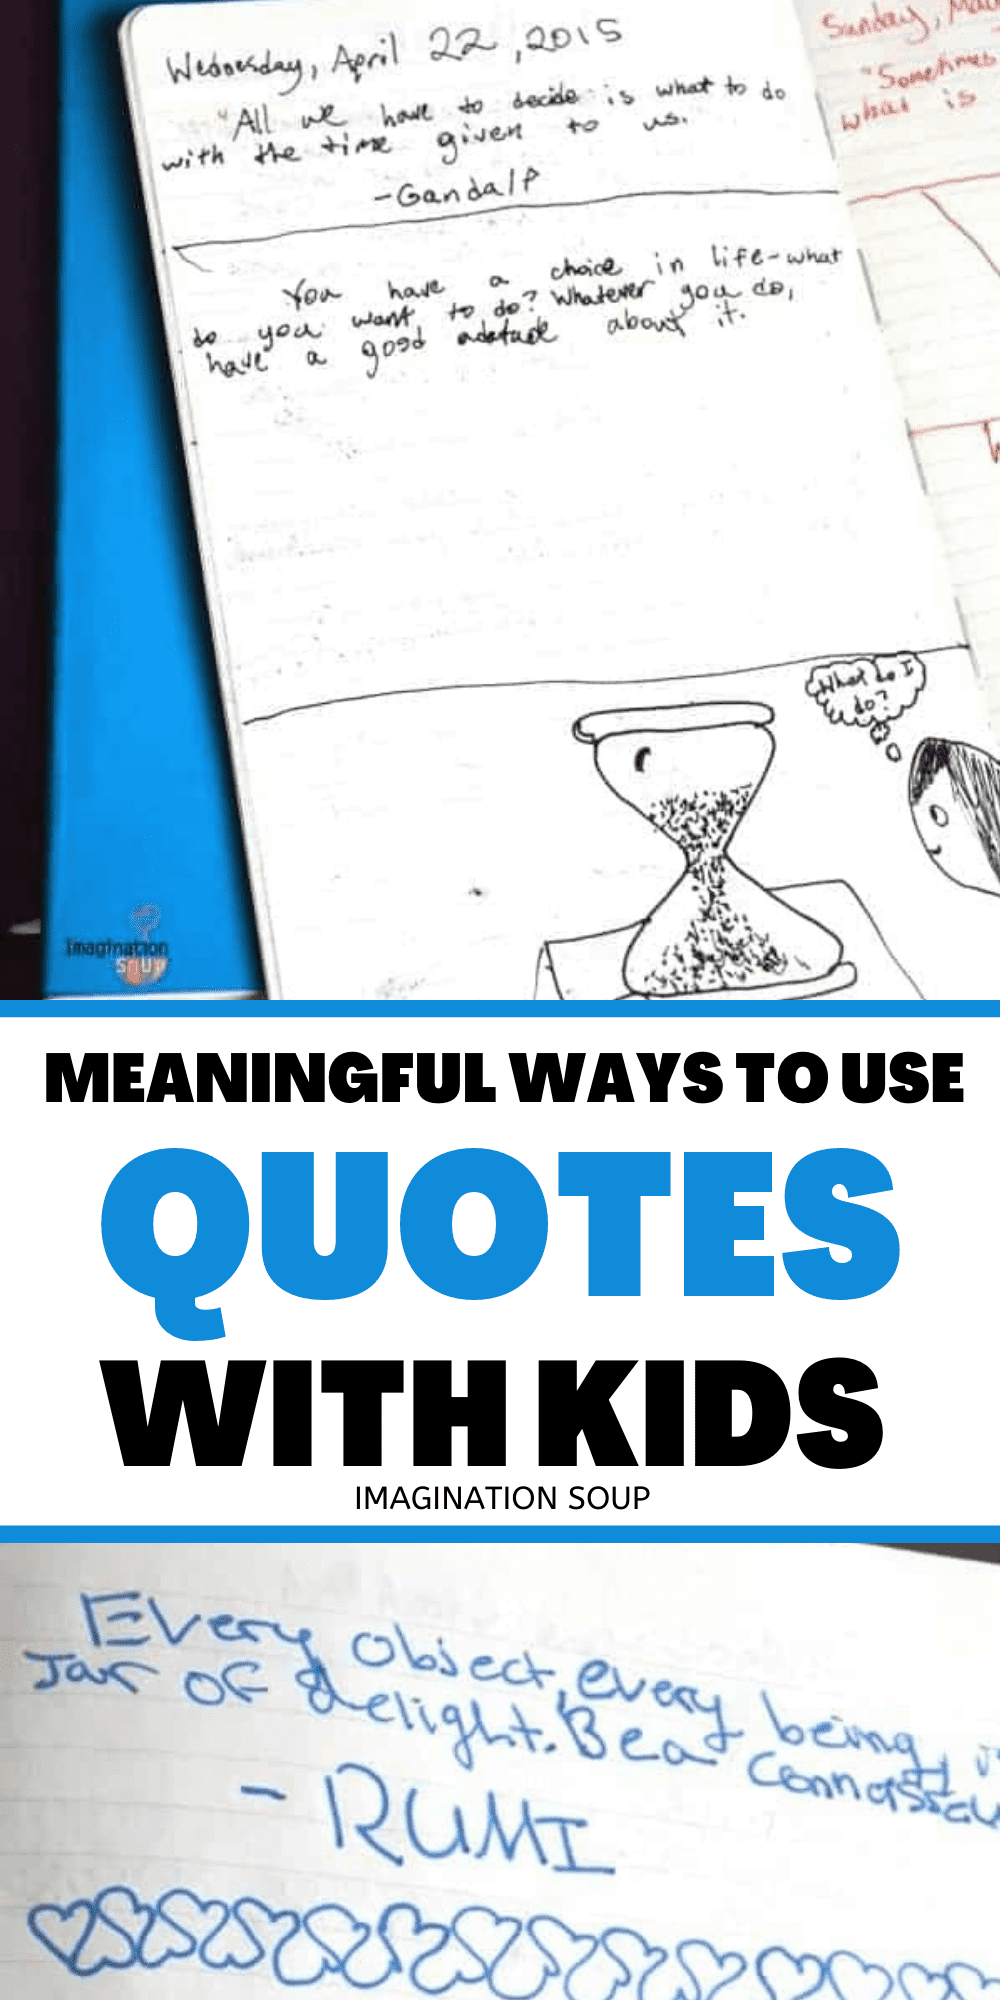 How to use quotes with kids